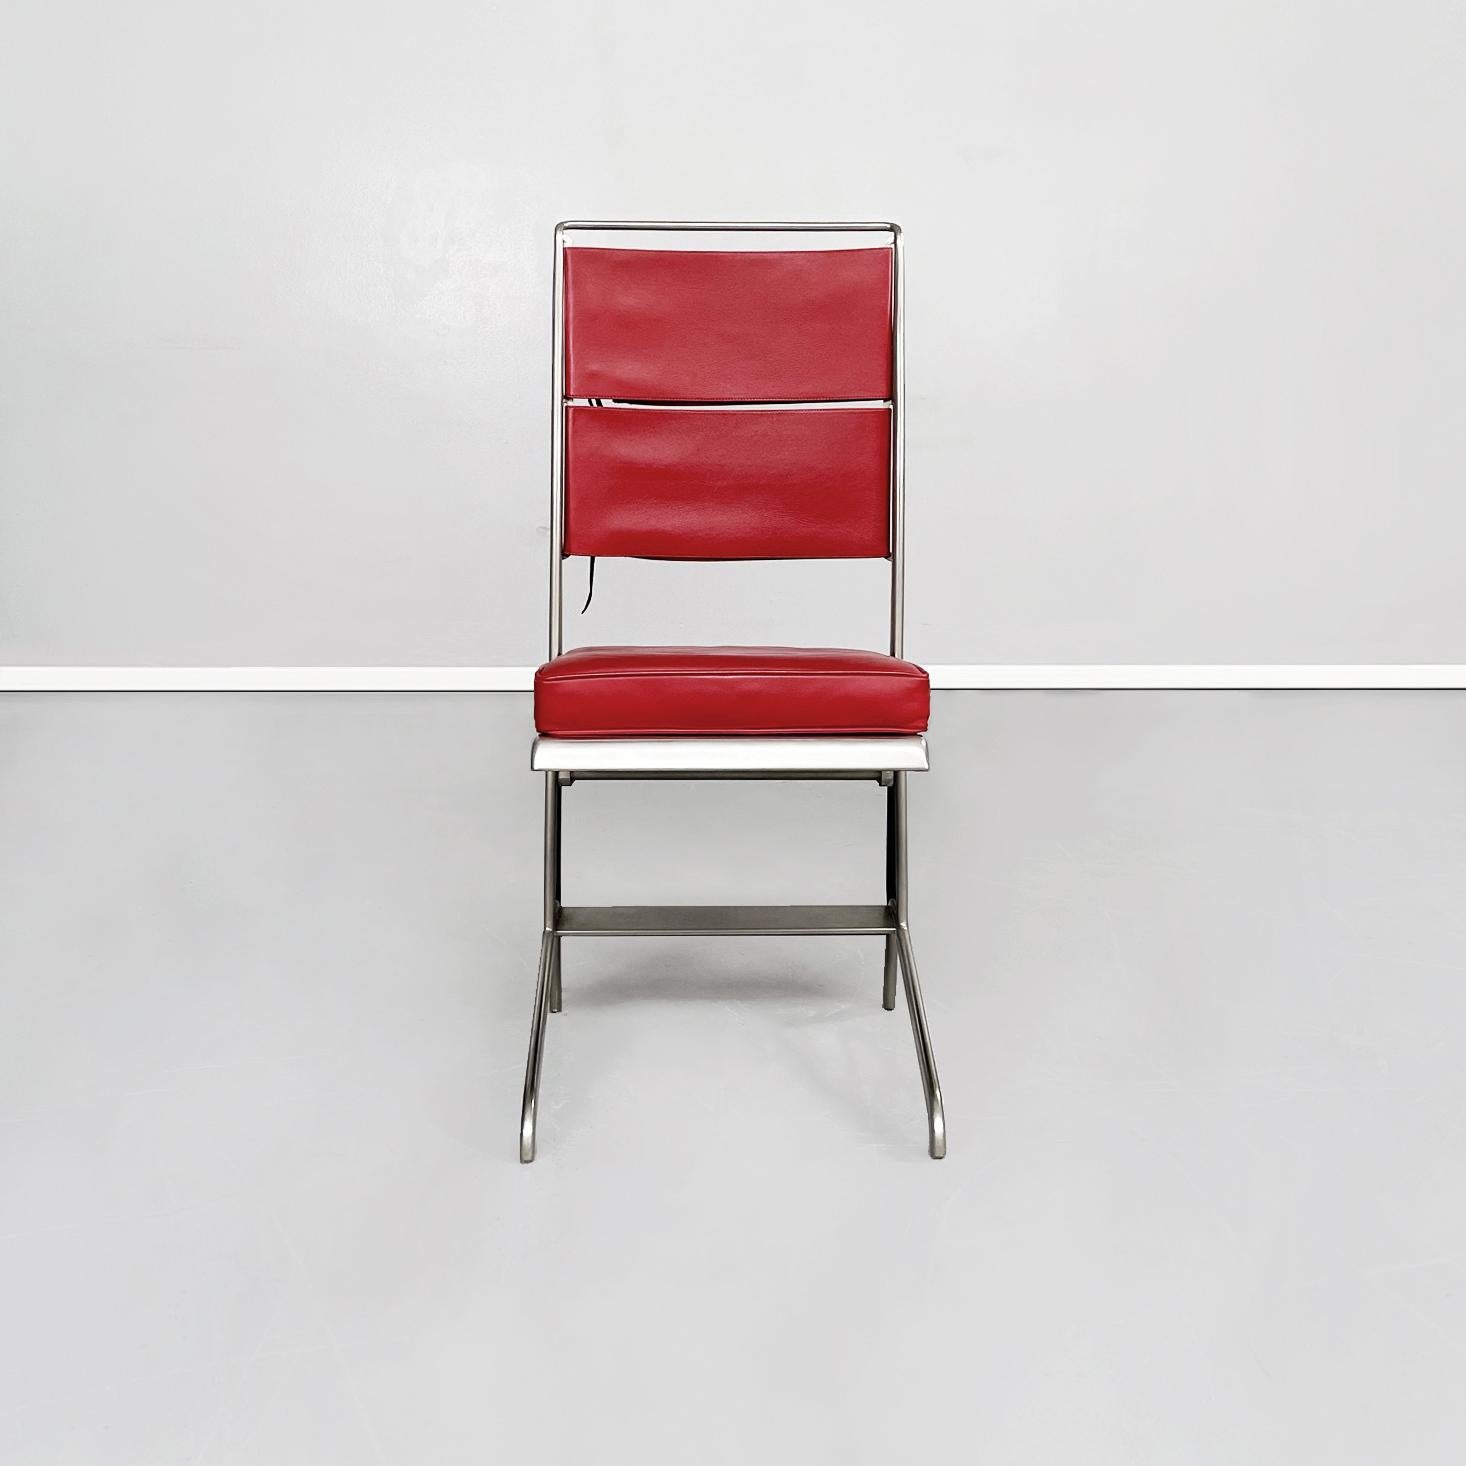 French mid-century Red leather and steel chairs by Jean Prouvé for Tecta, 1980s
Set of 3 chairs with steel structure and resealable seat. The seat is made up of a padded cushion covered in red leather, while the back is made up of two strips of red